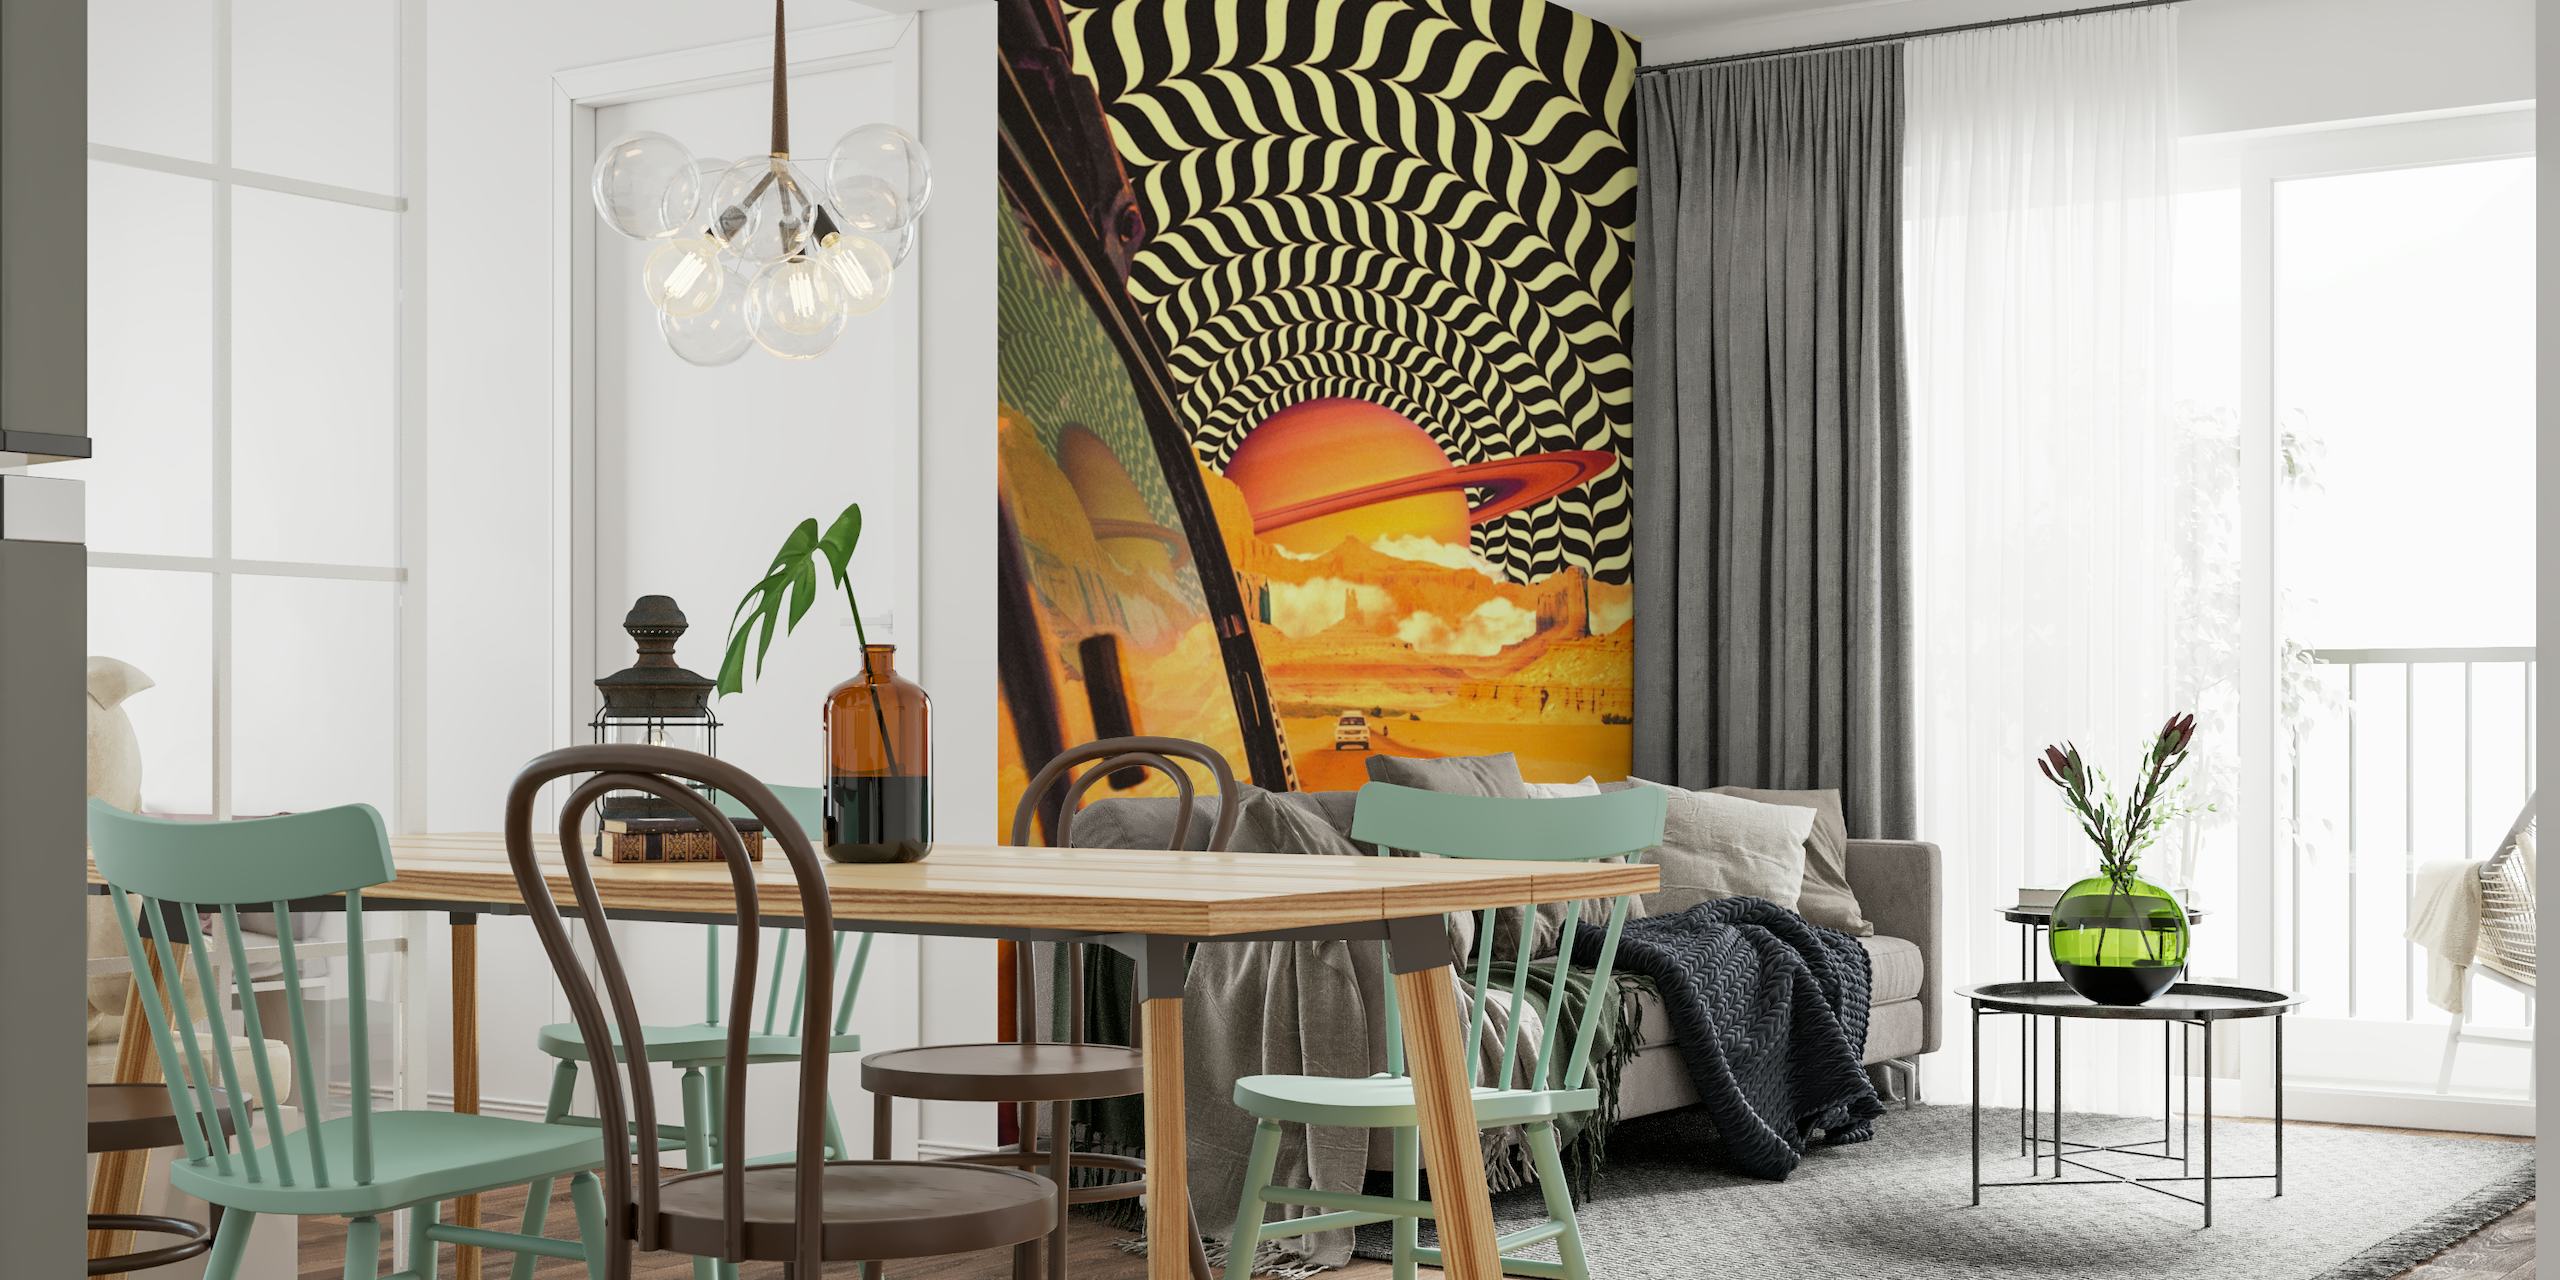 Abstract road trip-themed wall mural with checkered sky over desert landscape